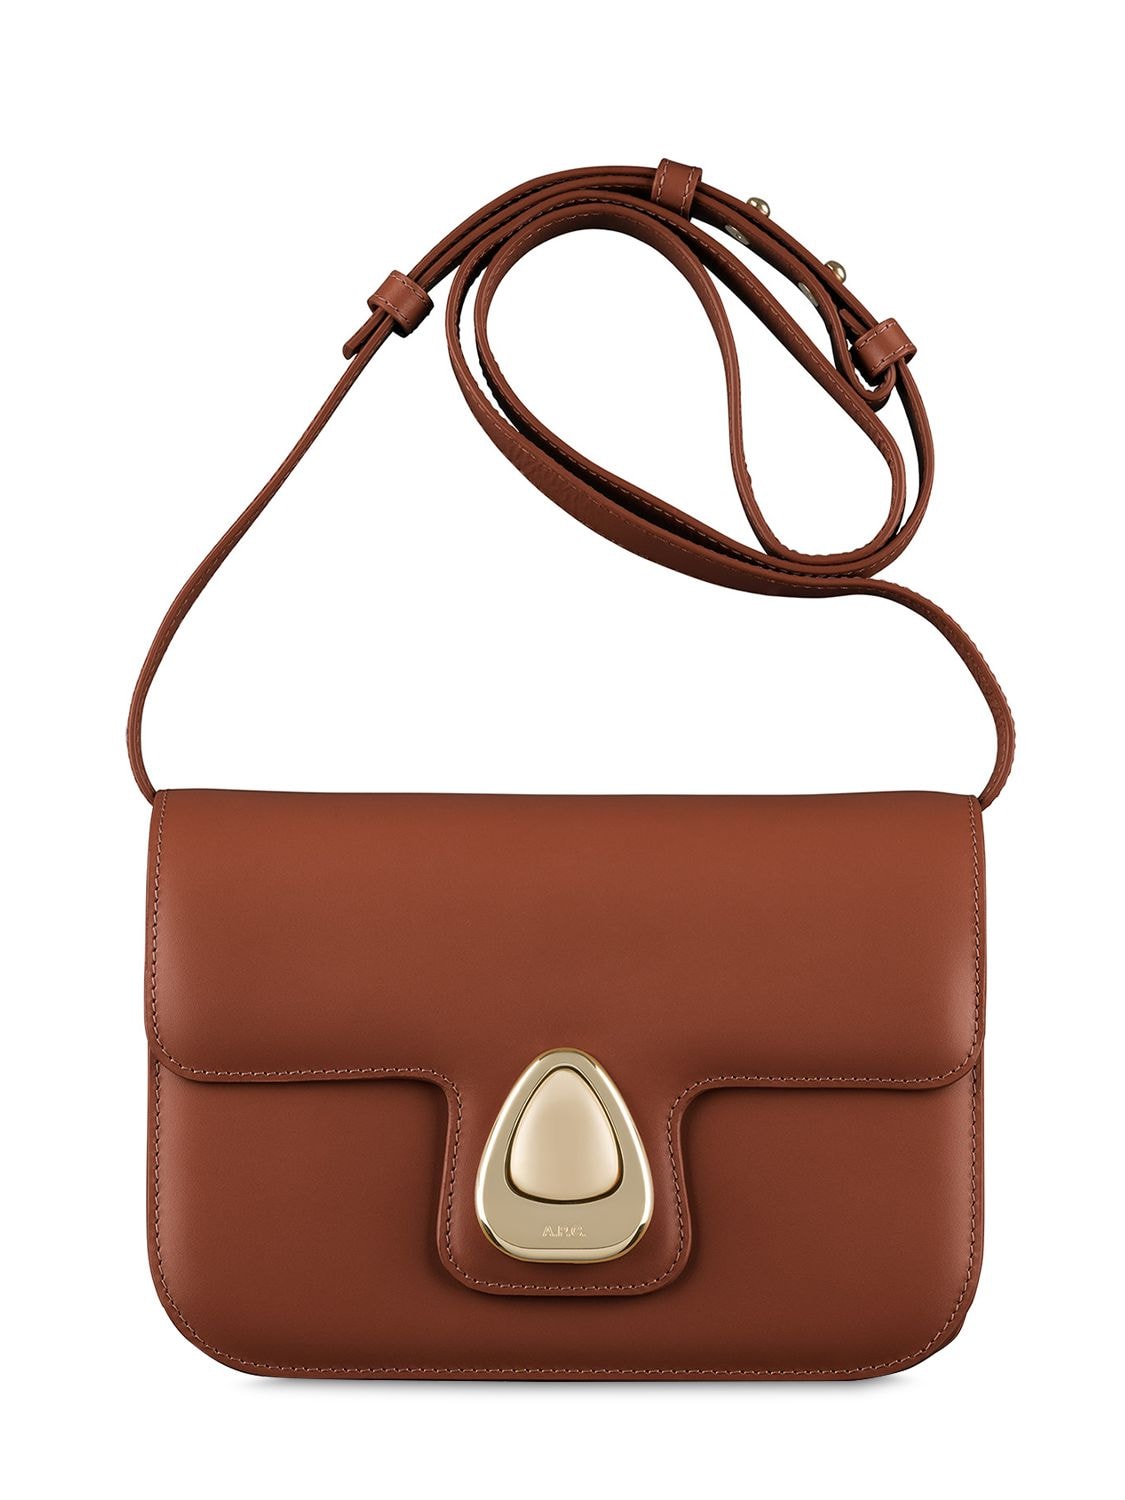 Apc Small Sac Astra Leather Shoulder Bag In Cad Noisette